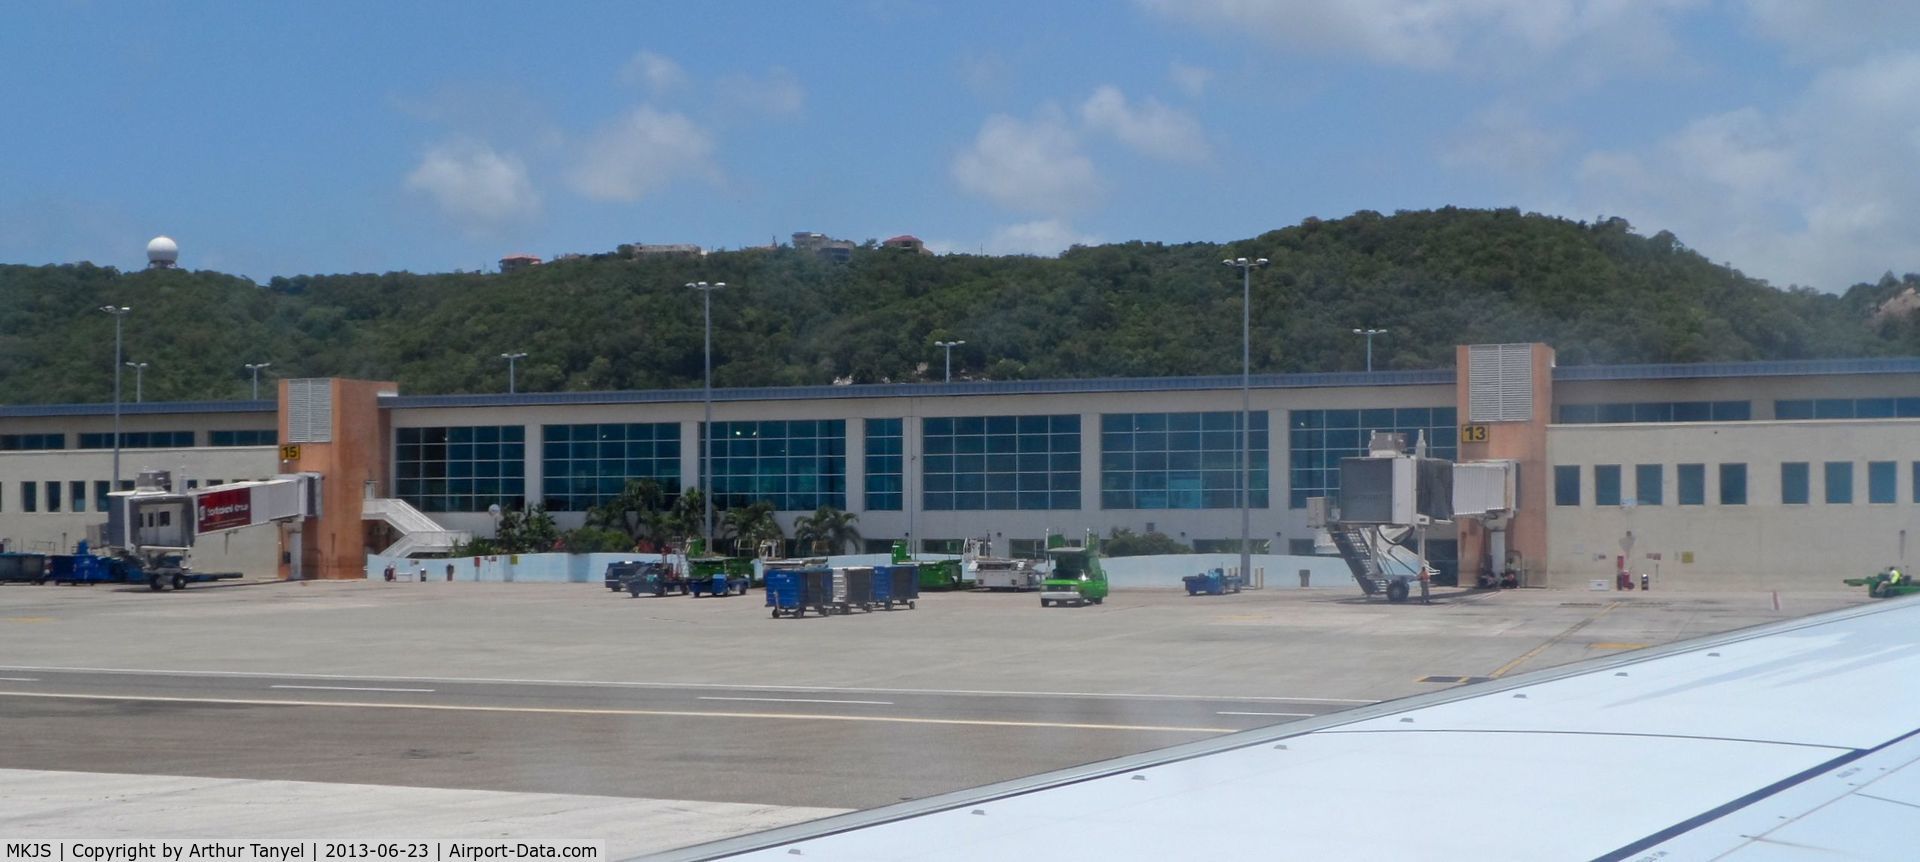 Sangster International Airport, Montego Bay Jamaica (MKJS) - Taxiing to the gate